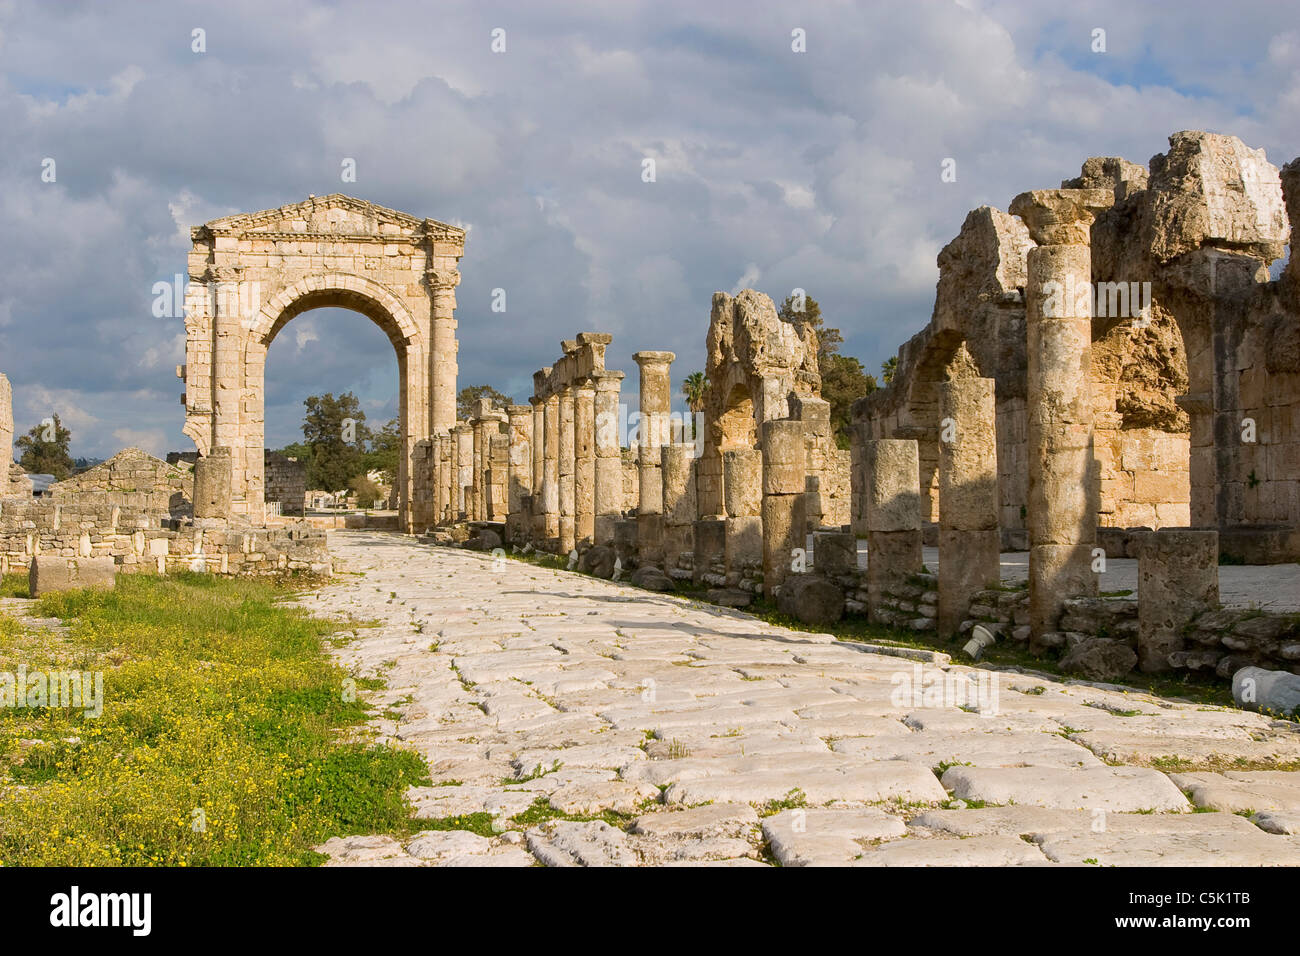 Arch of triumph erected during the Roman period in Tyre, Lebanon Stock Photo